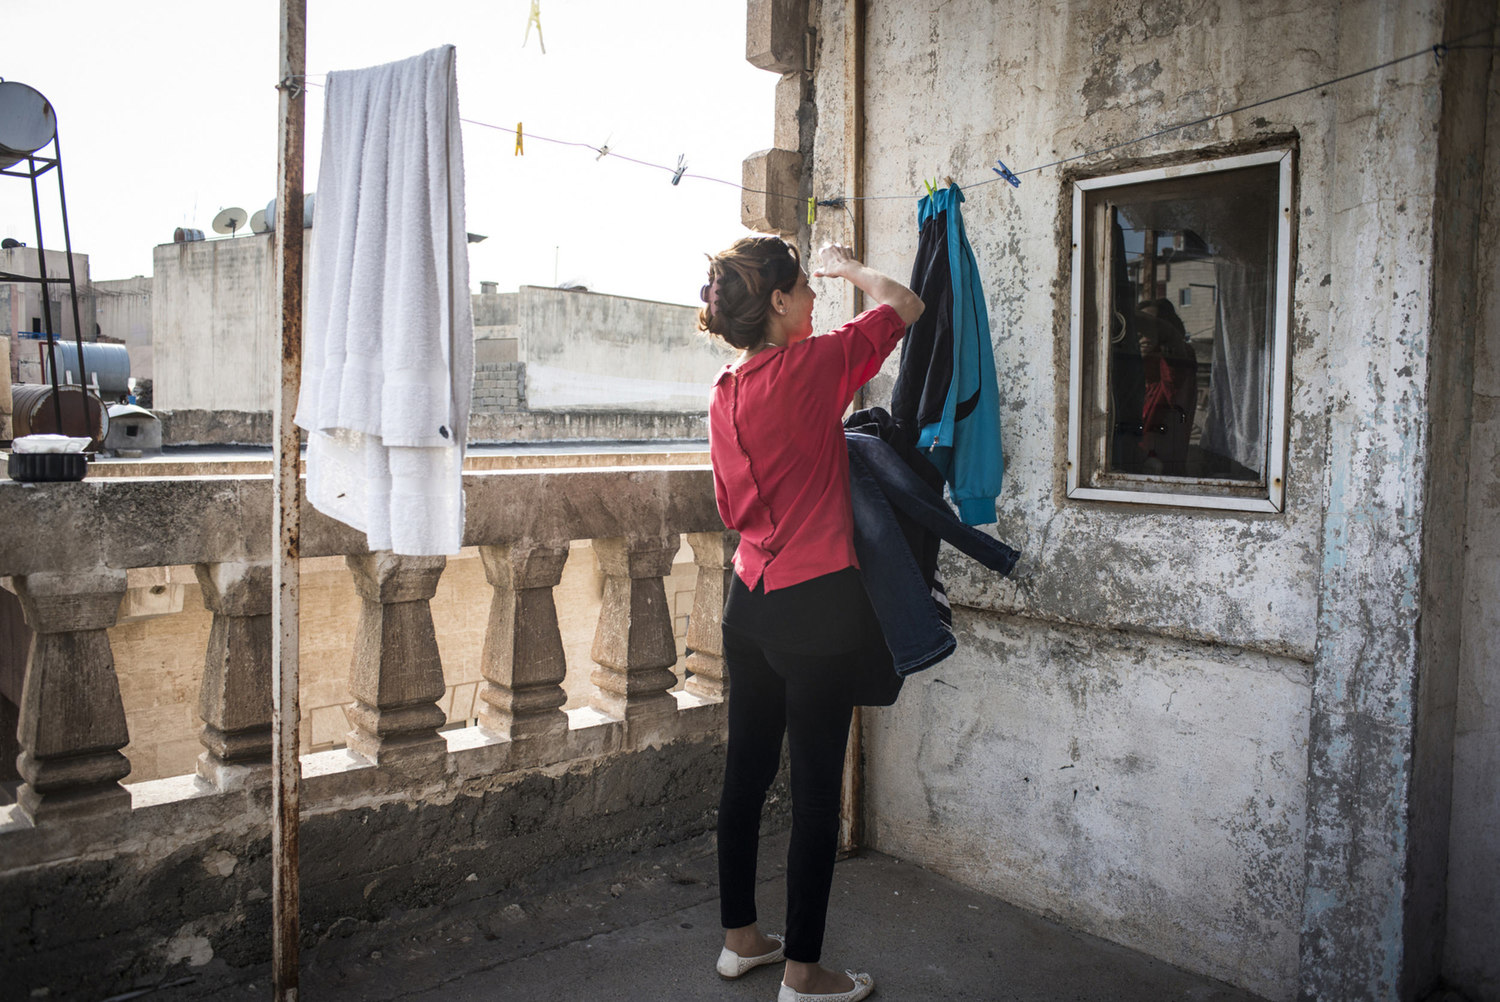  Ninwa Mirza takes in the laundry from outside of her temporary home in the Cultural Center on October 30th, 2014 in Midyat, Turkey. 
 